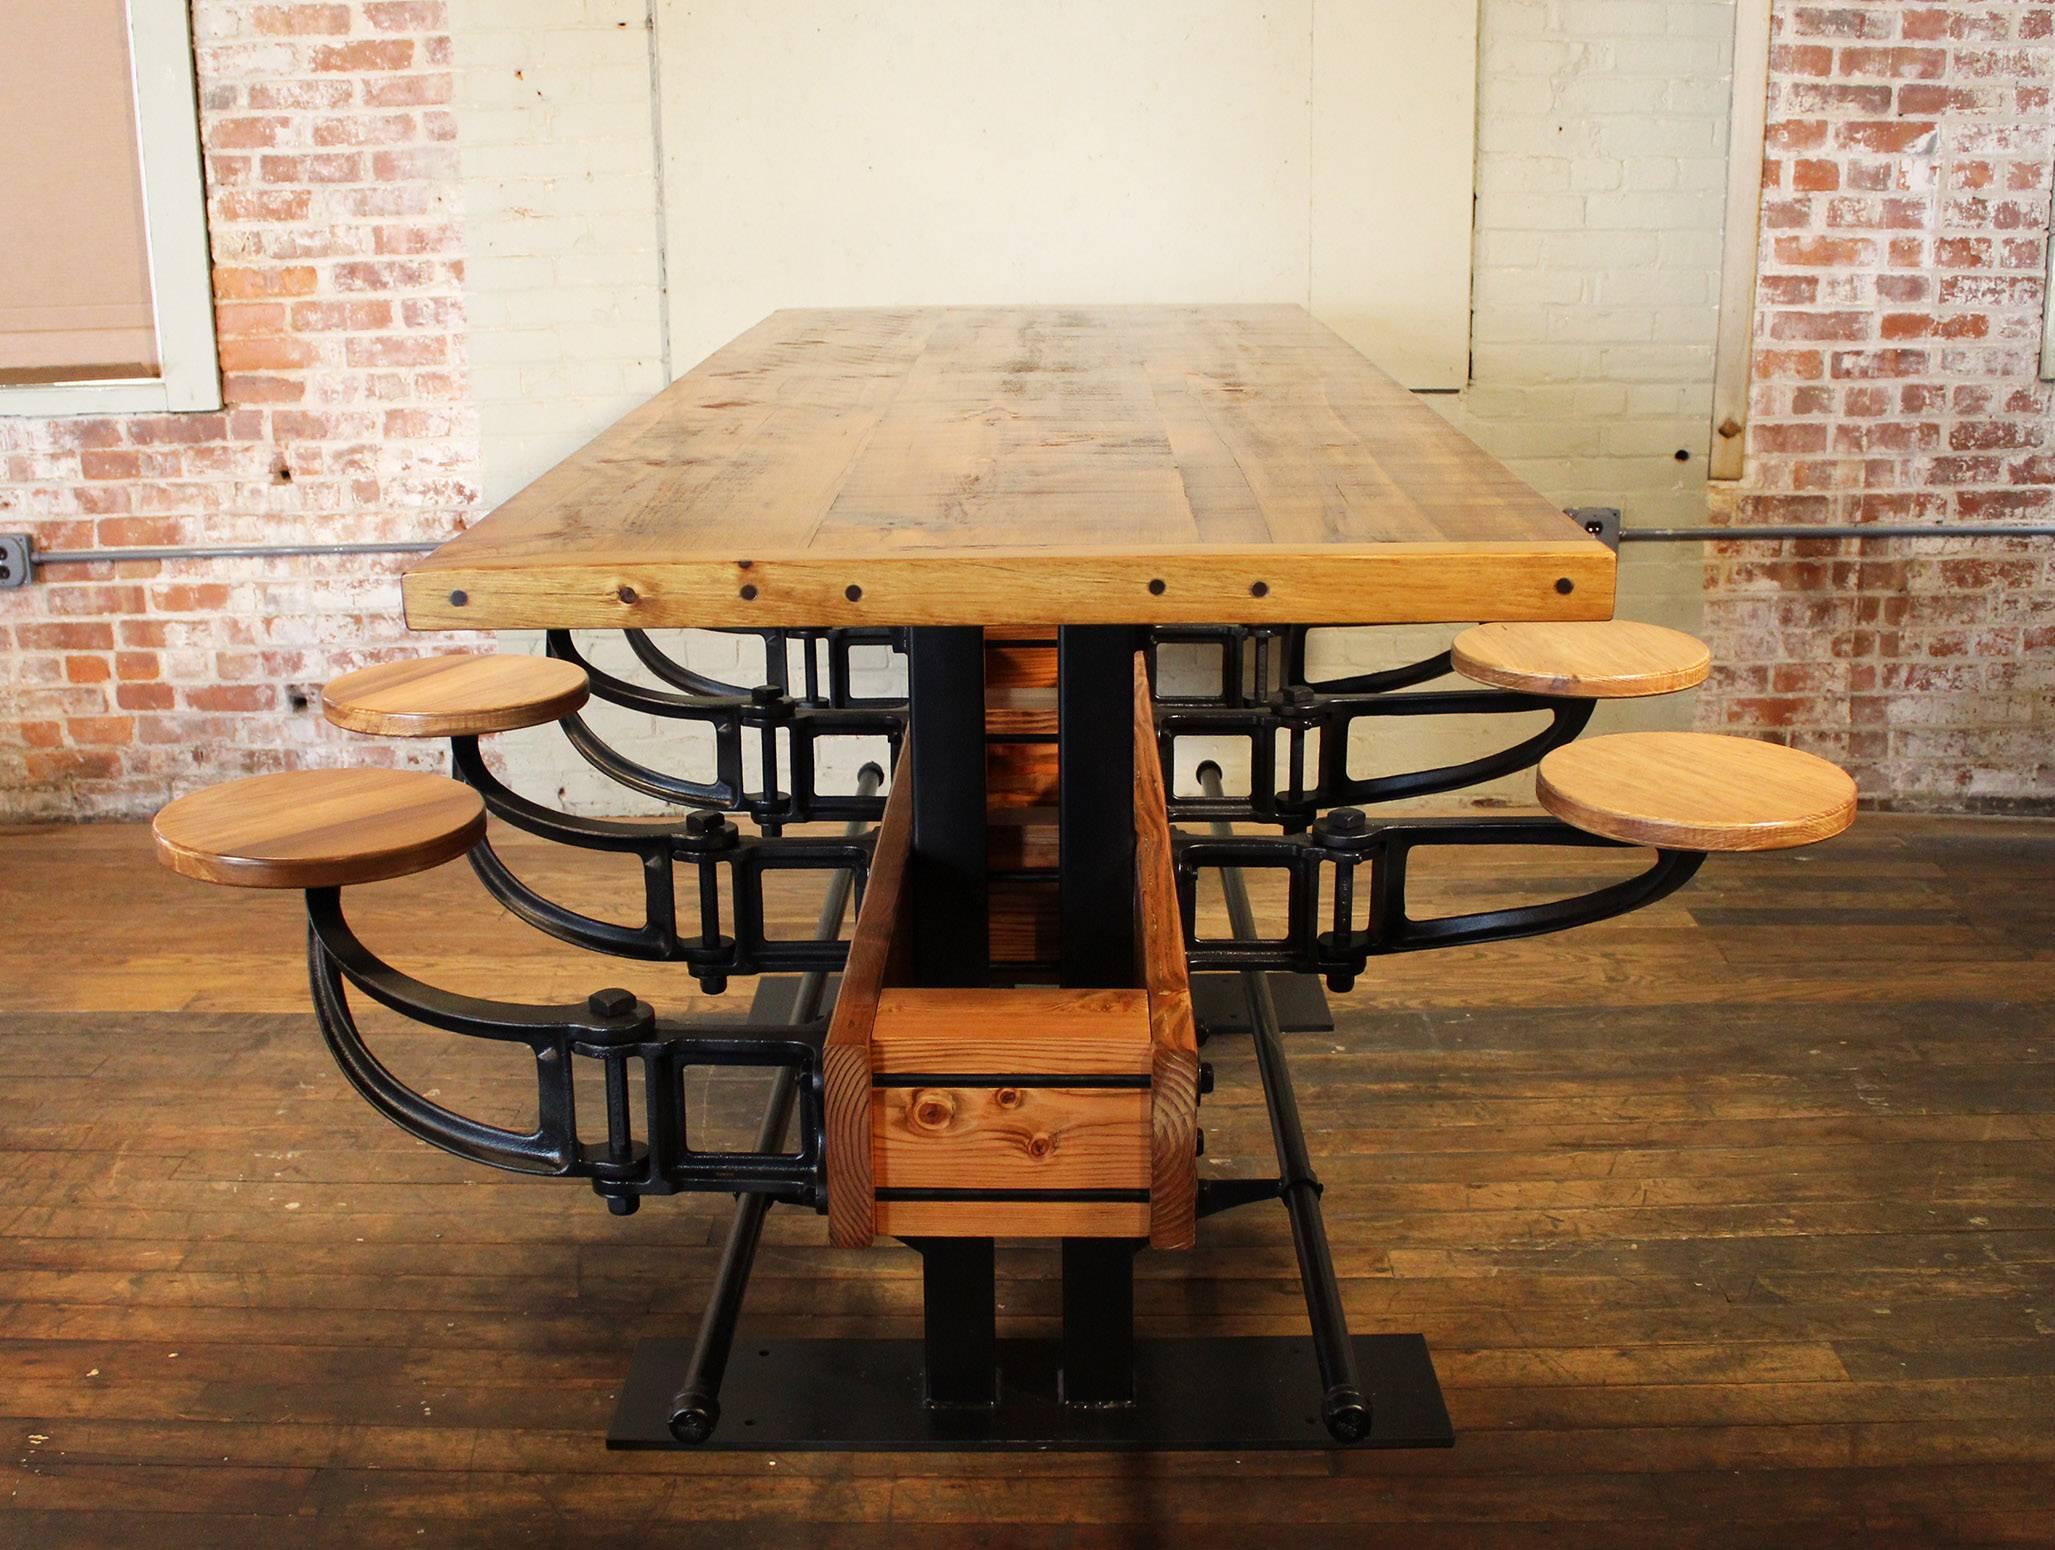 Swing out seat restaurant bar / pub height table. Made from wood, cast iron and steel. Featuring eight cast iron and wood swing out seats, foot rails and 2